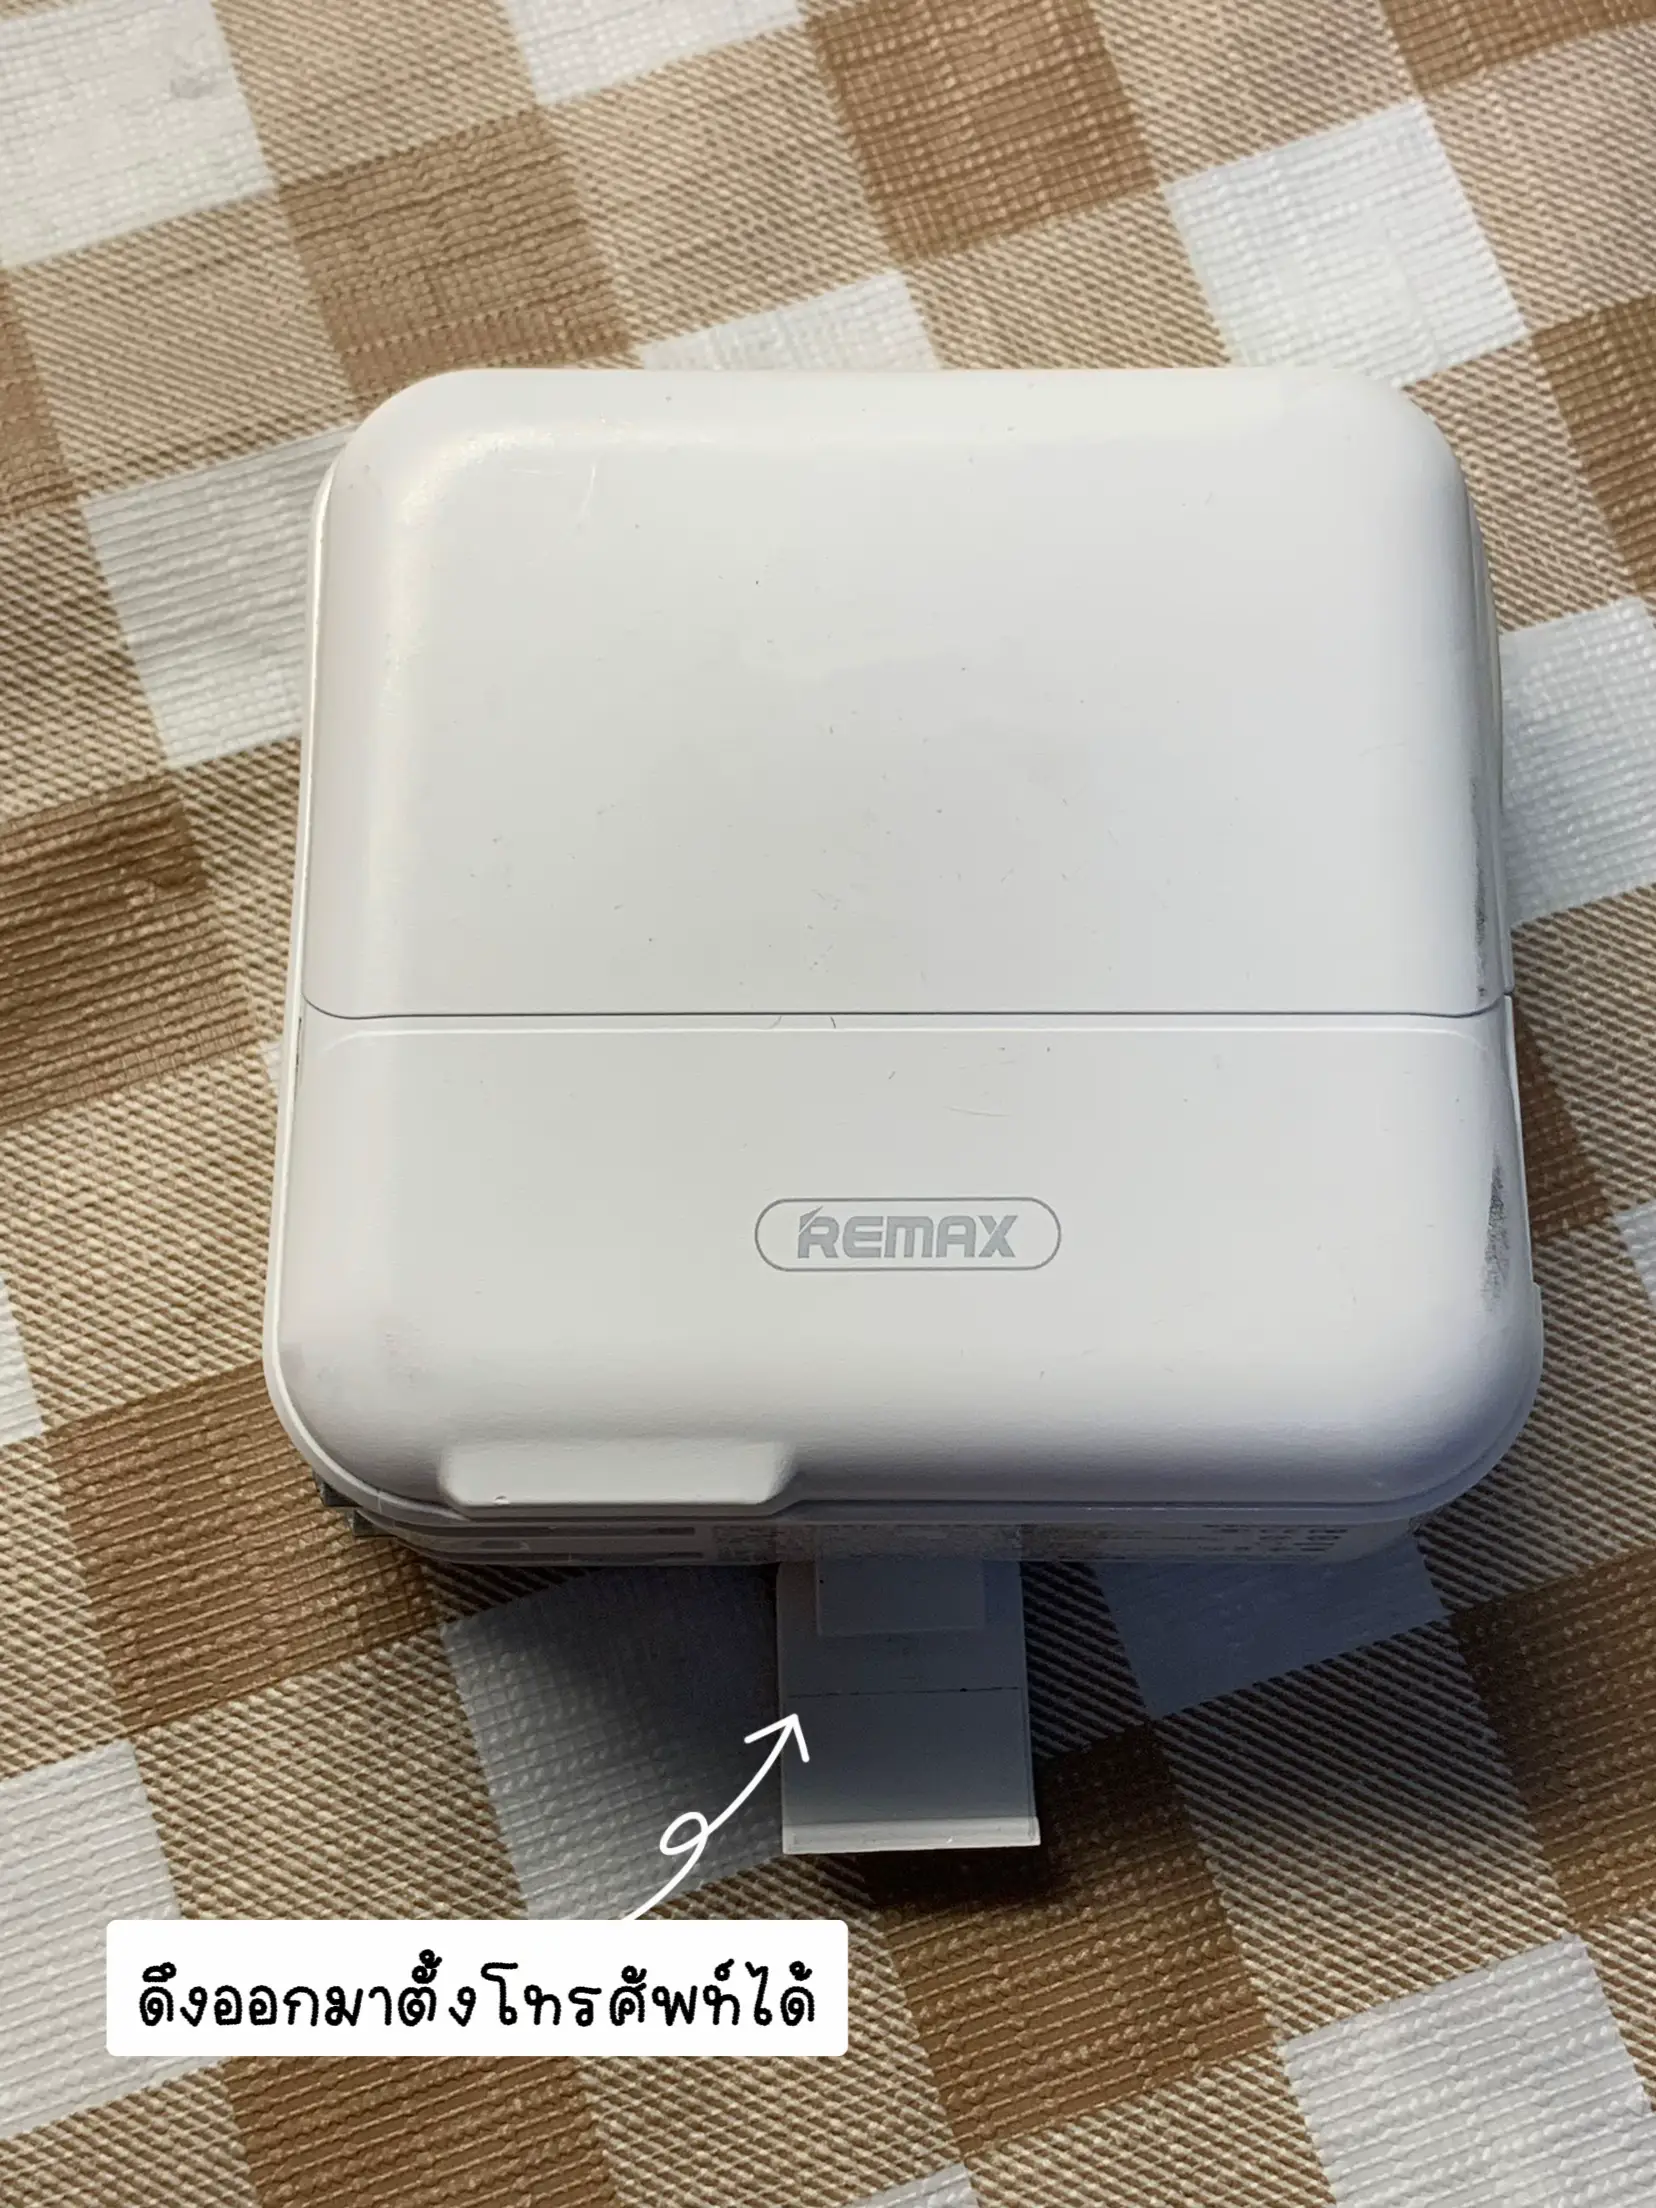 Power Bank Remax Review, 15,000 mAh, Gallery posted by _jl.2109_